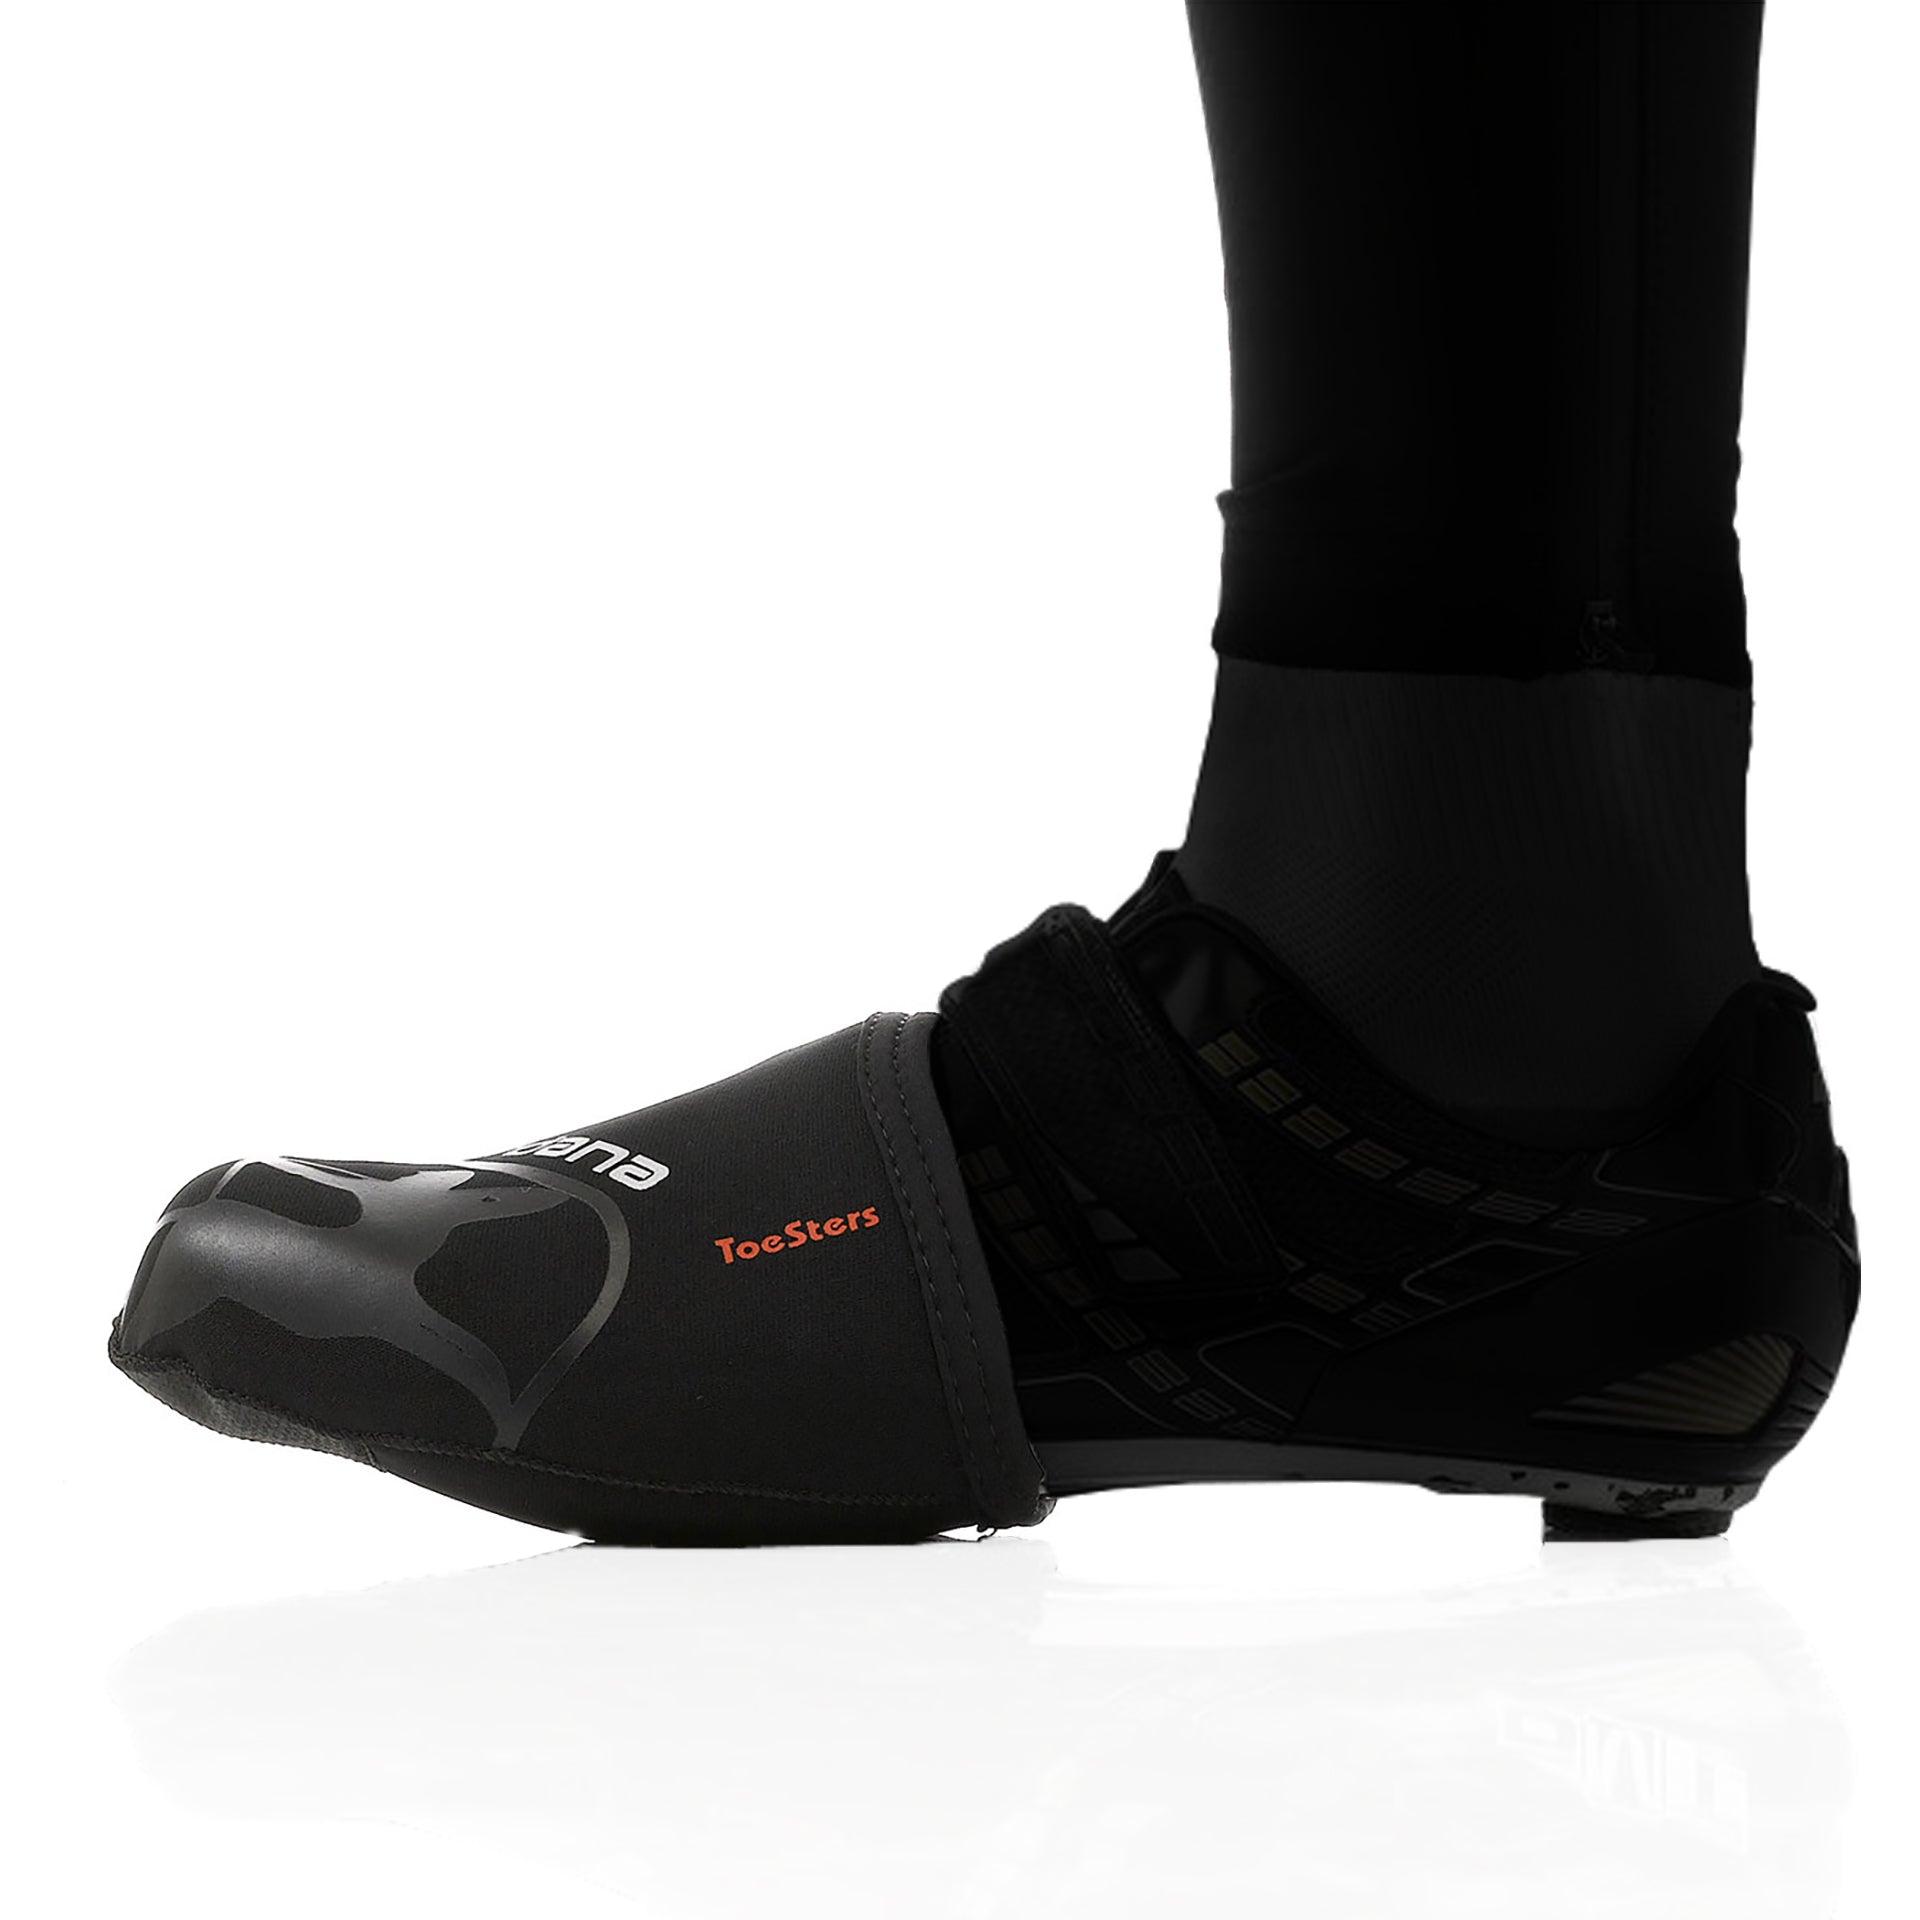 erotisch Landgoed spanning Giordana Cycling - Toesters Toe Covers